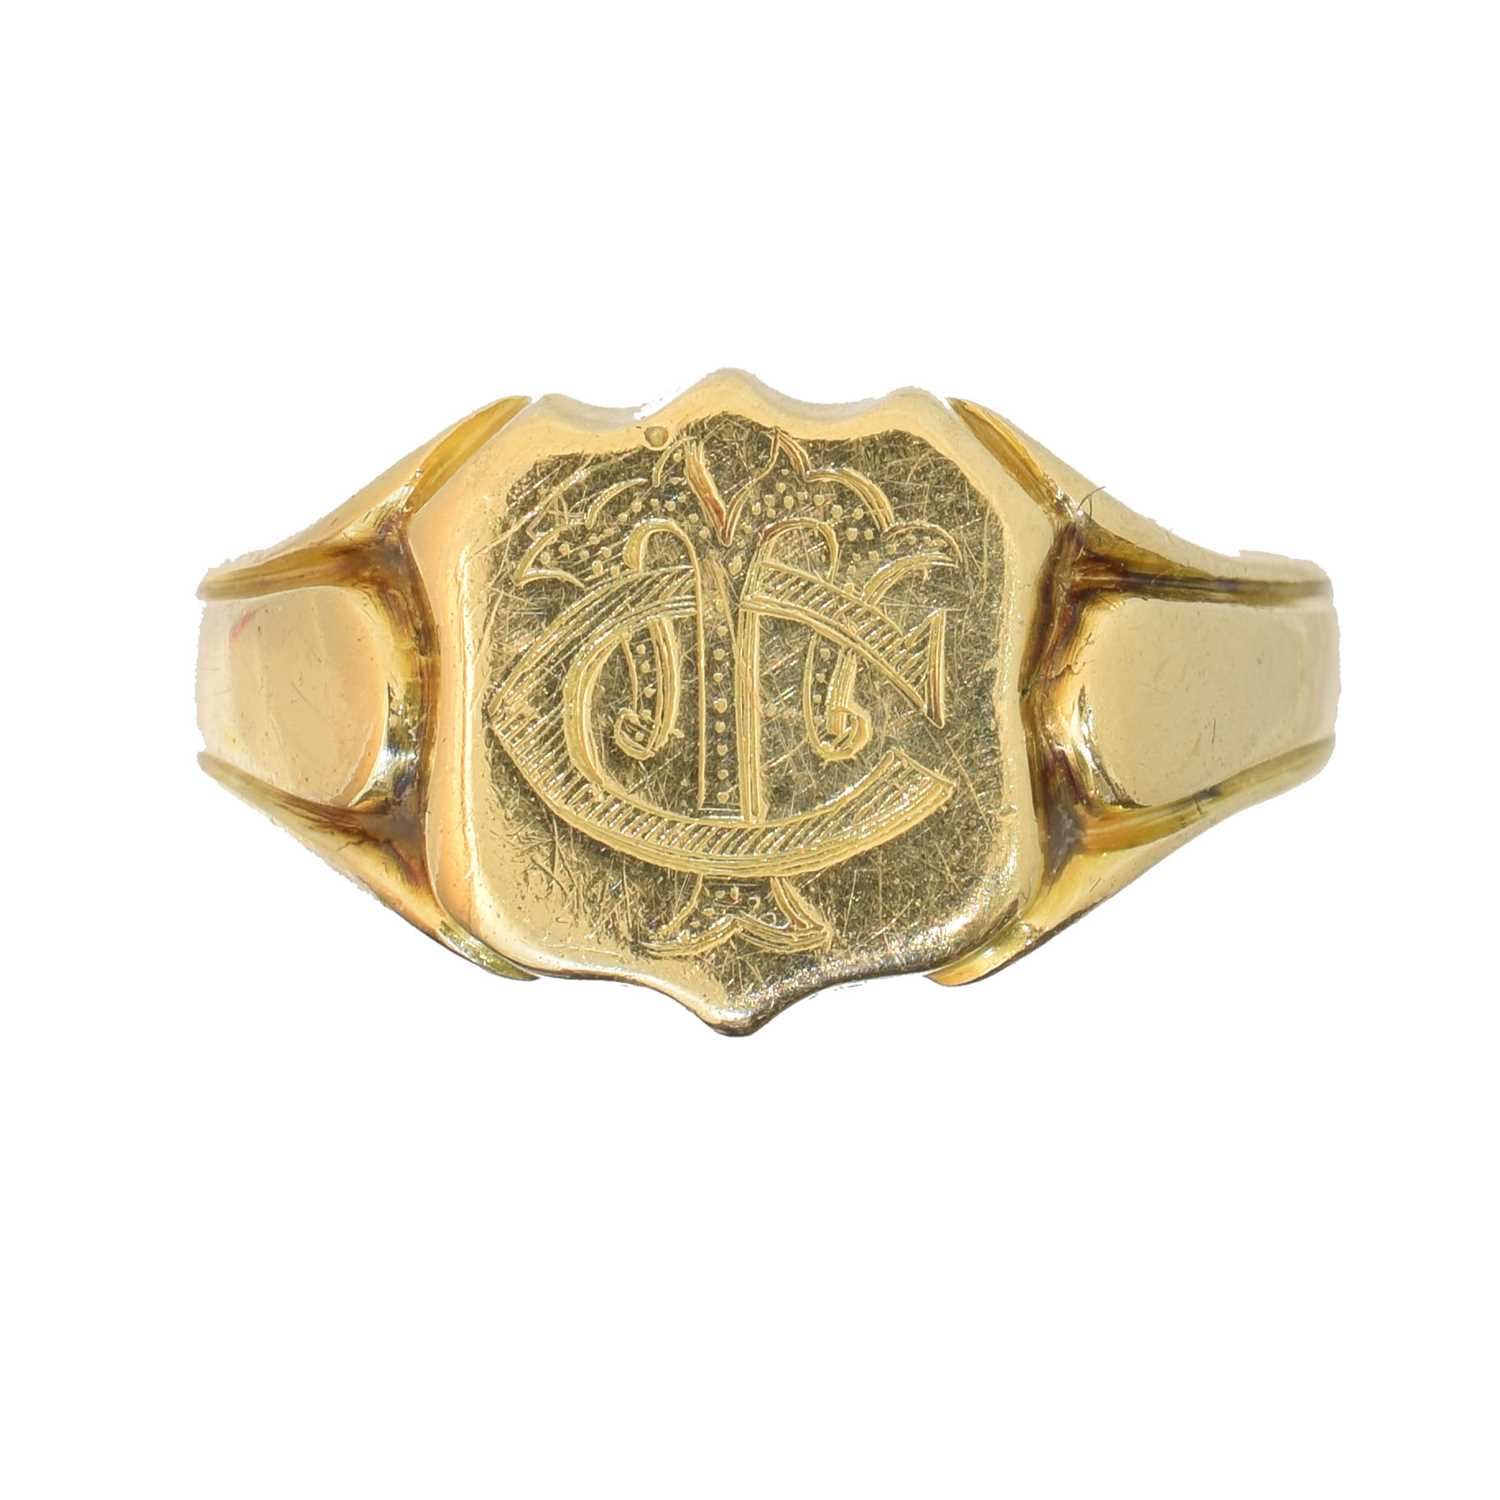 Lot 11 - A signet ring